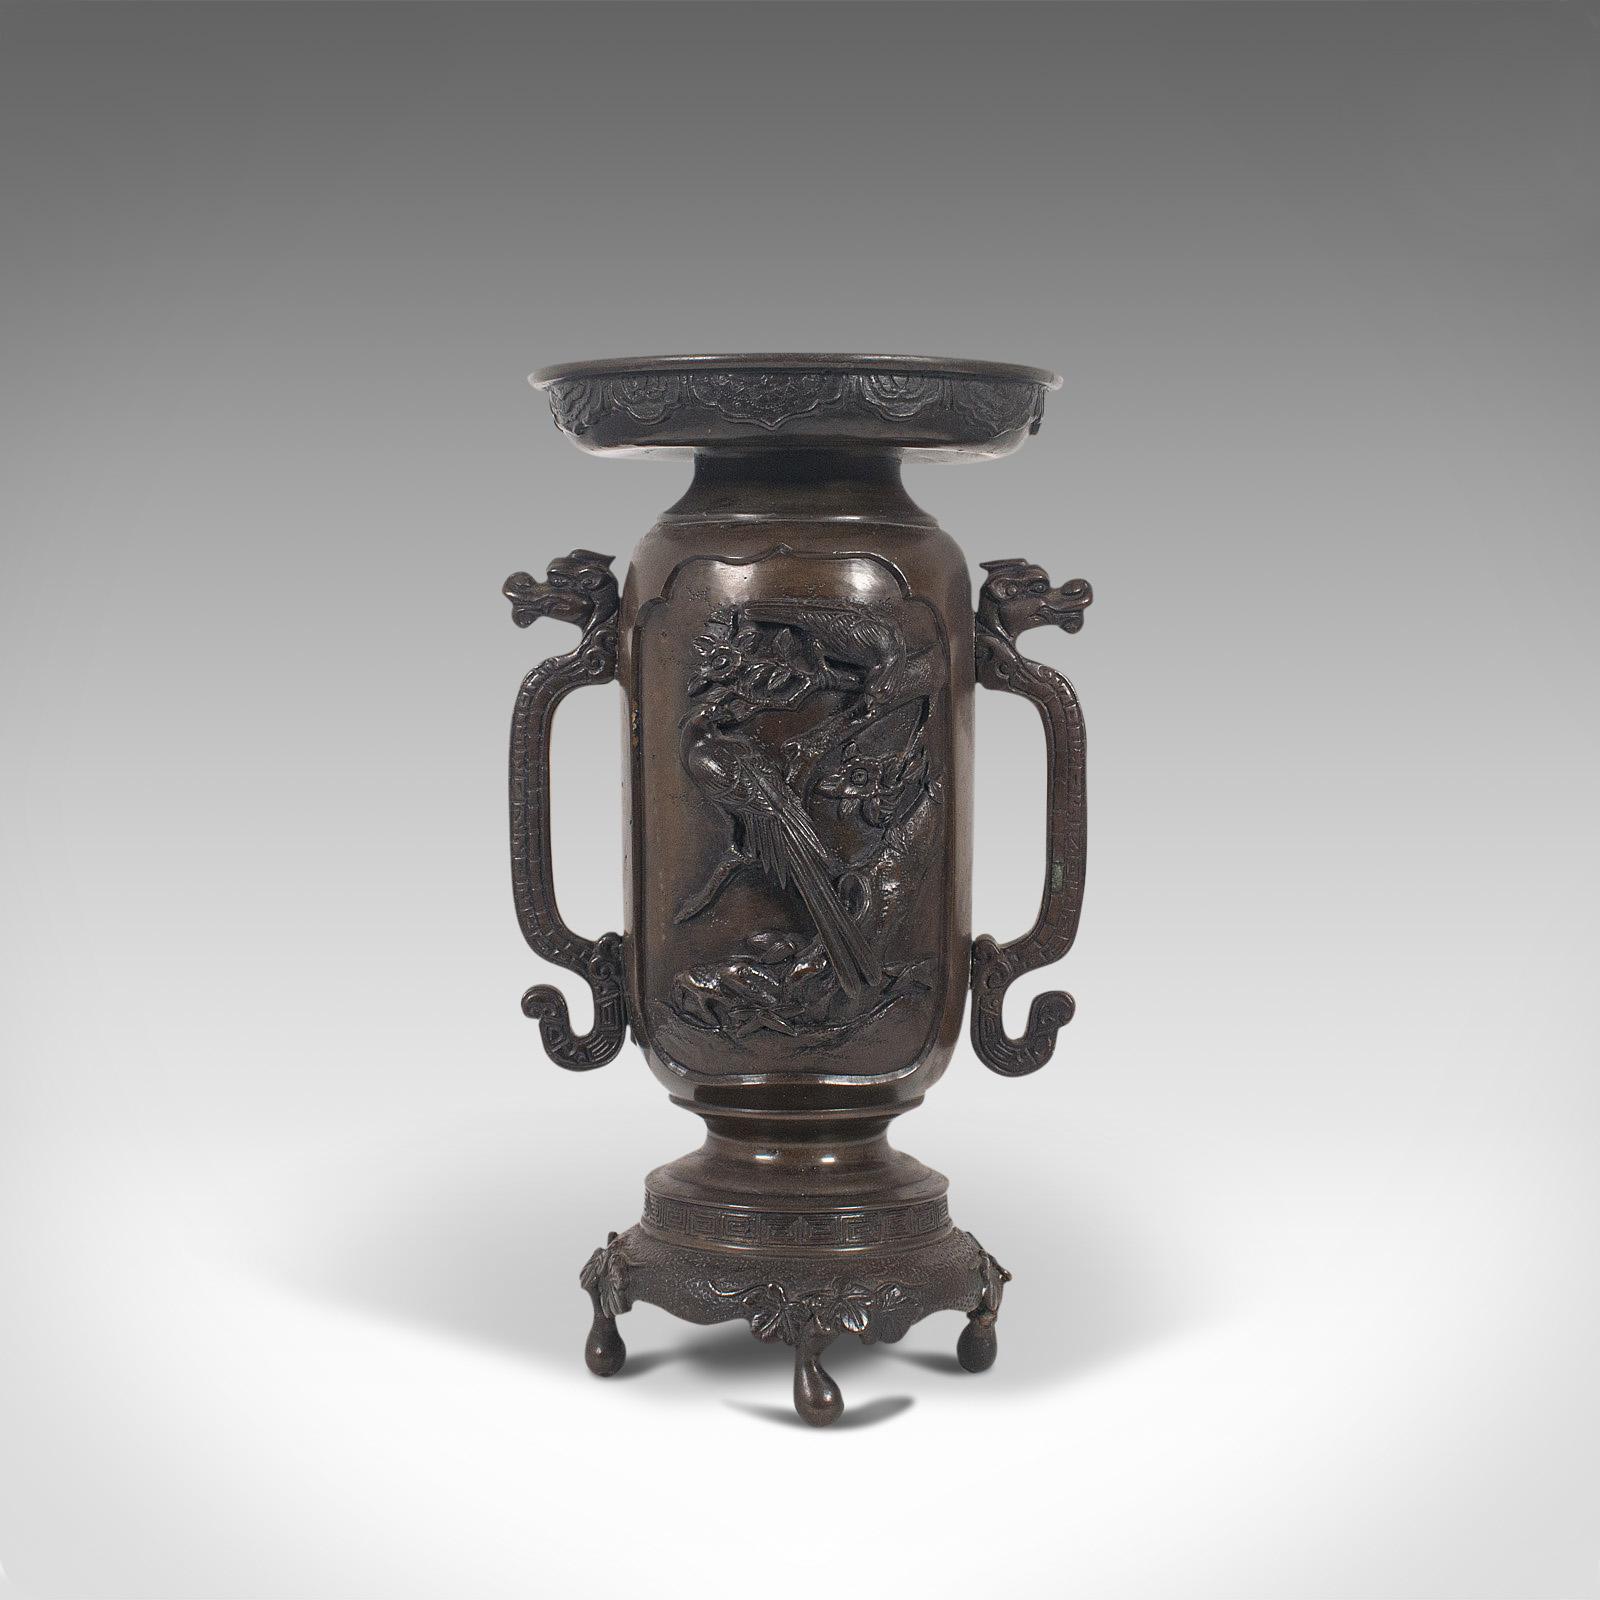 This is an antique decorative twin-handled vase. A Japanese, bronze Meiji period vase, dating to the late 19th century, circa 1900.

An impressive vase with striking detail
Displaying a desirable aged patina by way of fine weathering
Bronze